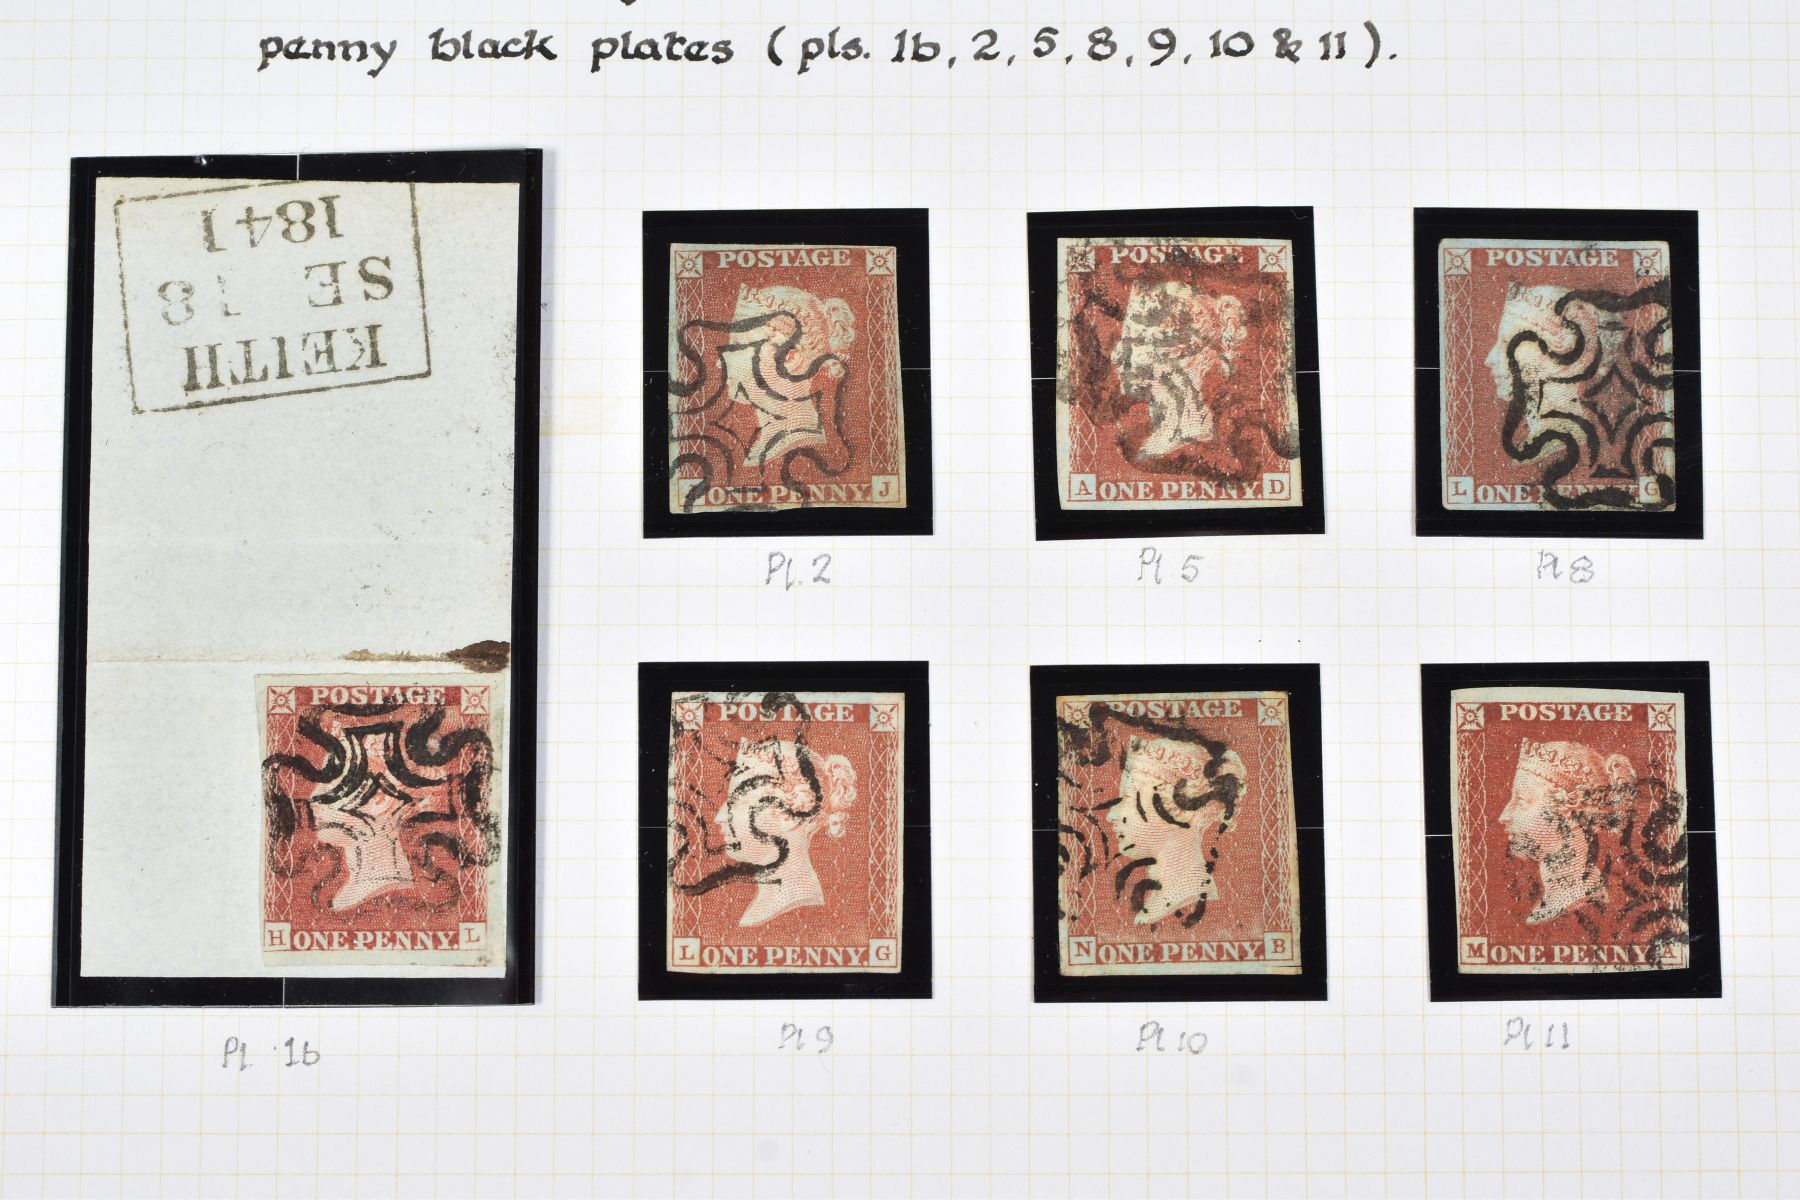 GB 1841 PENNY RED stated to be from Black plates and one unplated imperf red mint hinged with - Image 2 of 5